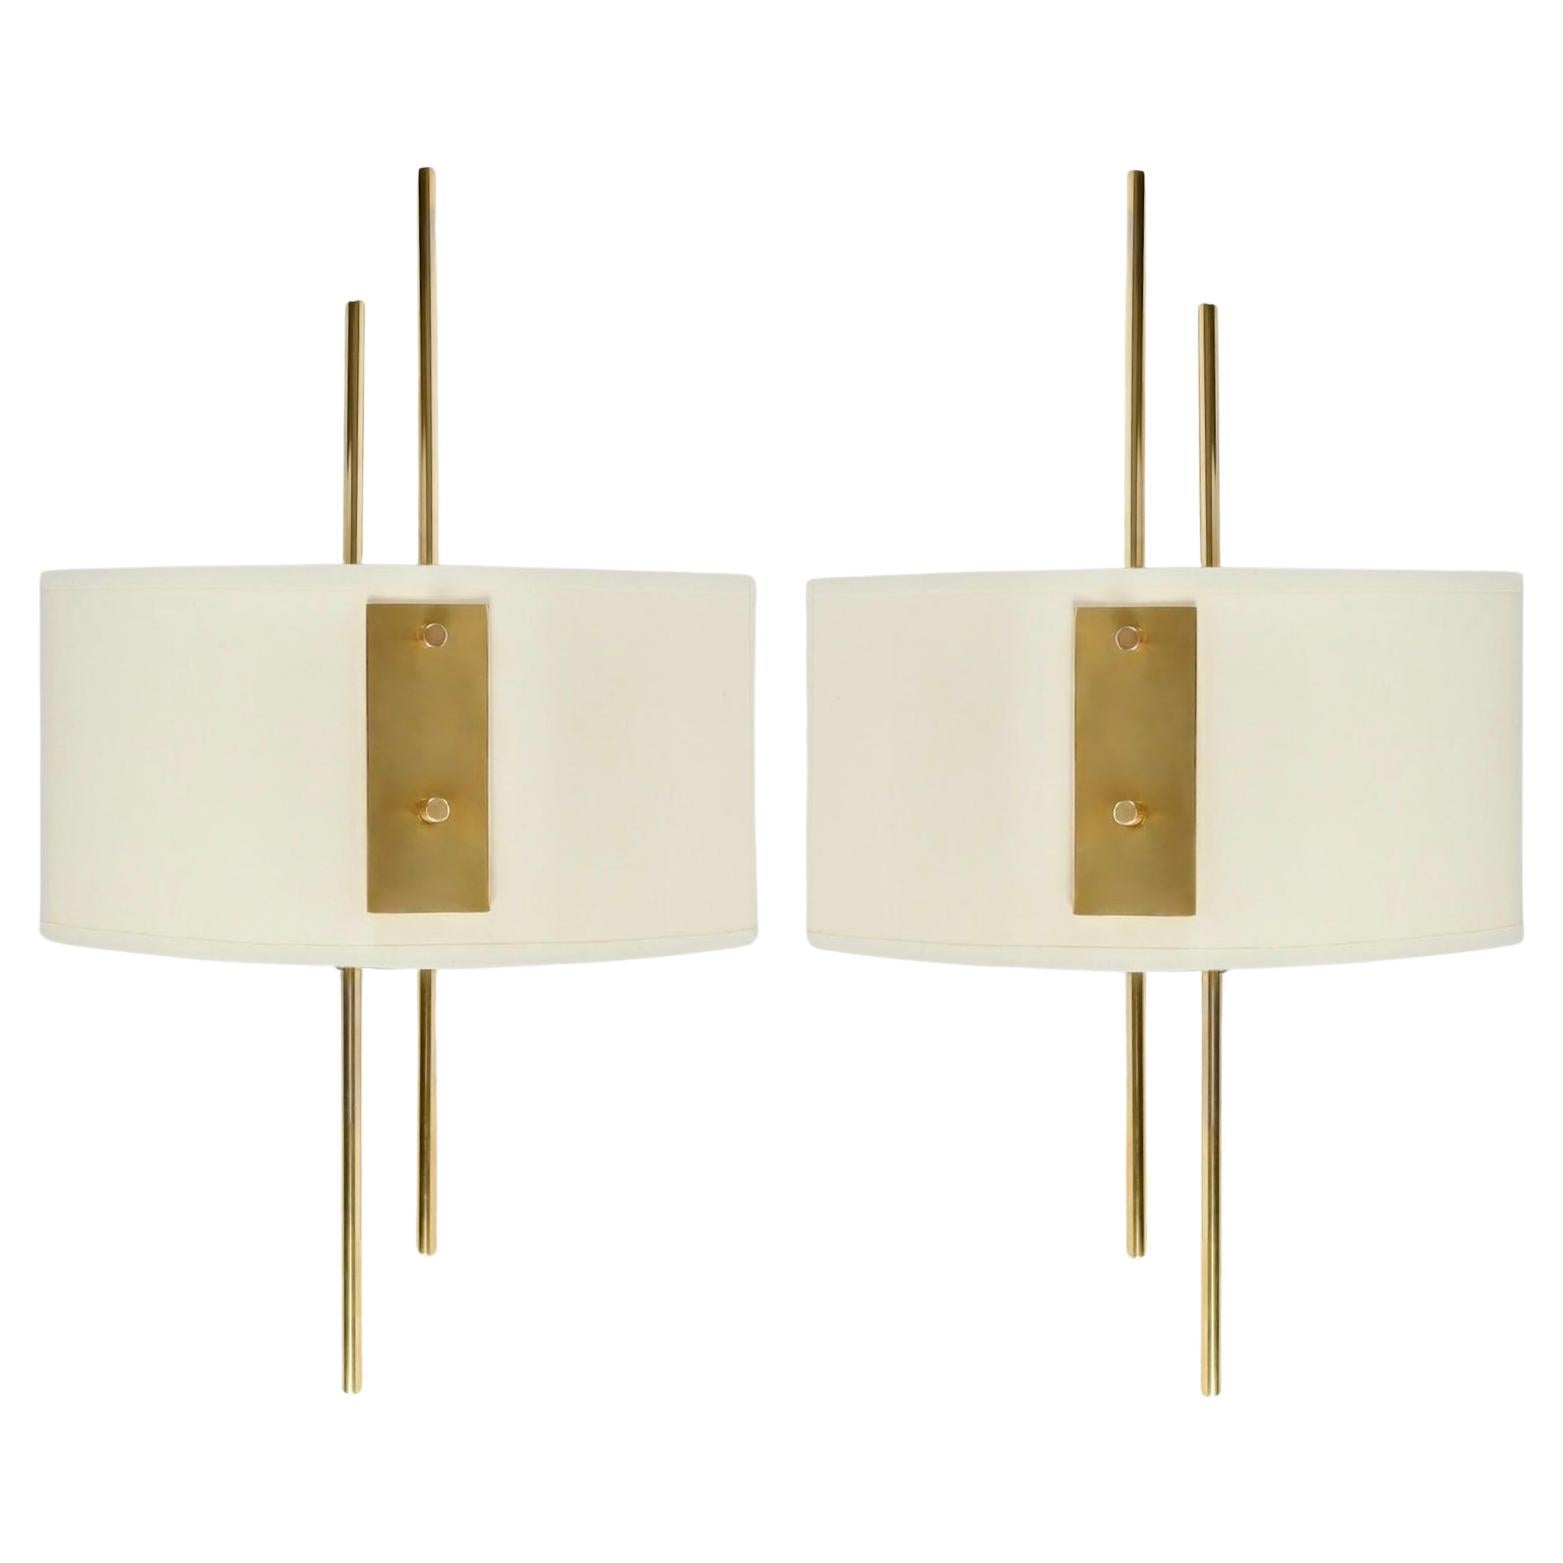 1950 Pair of Wall Lamps Maison Arlus